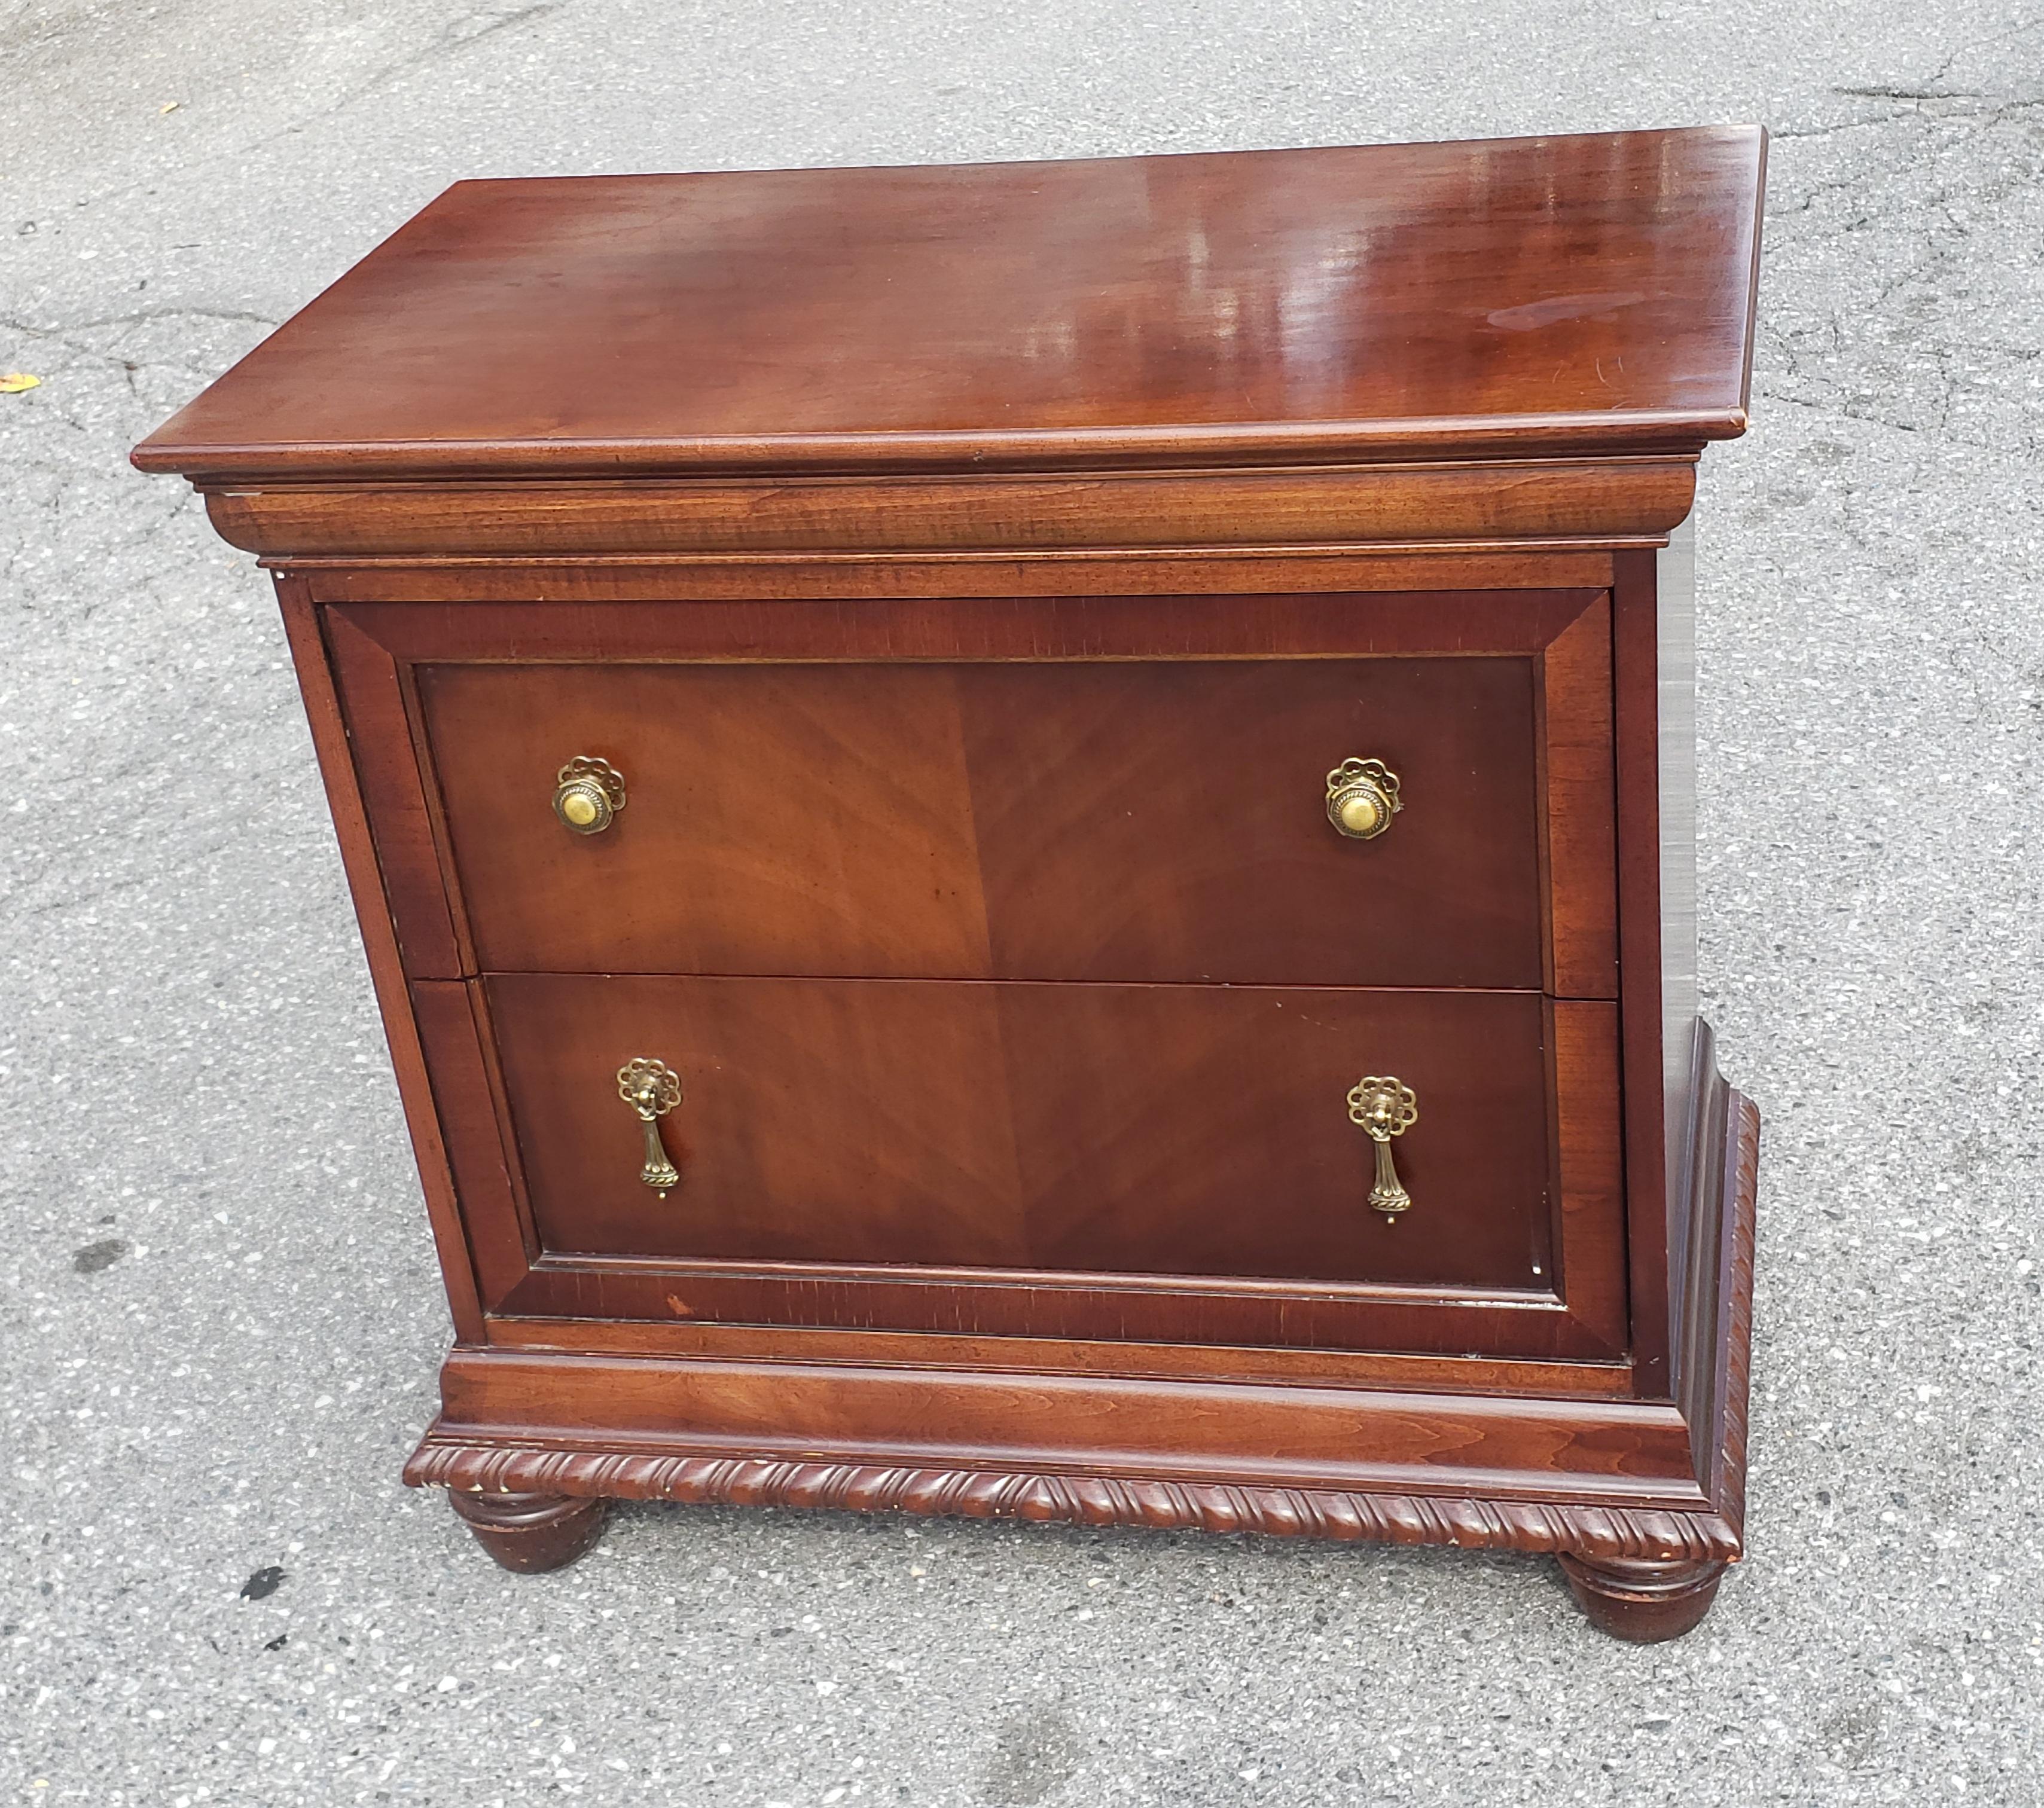 A well kepth 1980s National Mt Airy furniture Bookmatched Mahogany Bedside Chest of Drawers / Nighstand. Very well constructed. Mahogany bookmatched veneer drawer door on mahogany. Very good vintage condition. We have the matching bed and dresser in